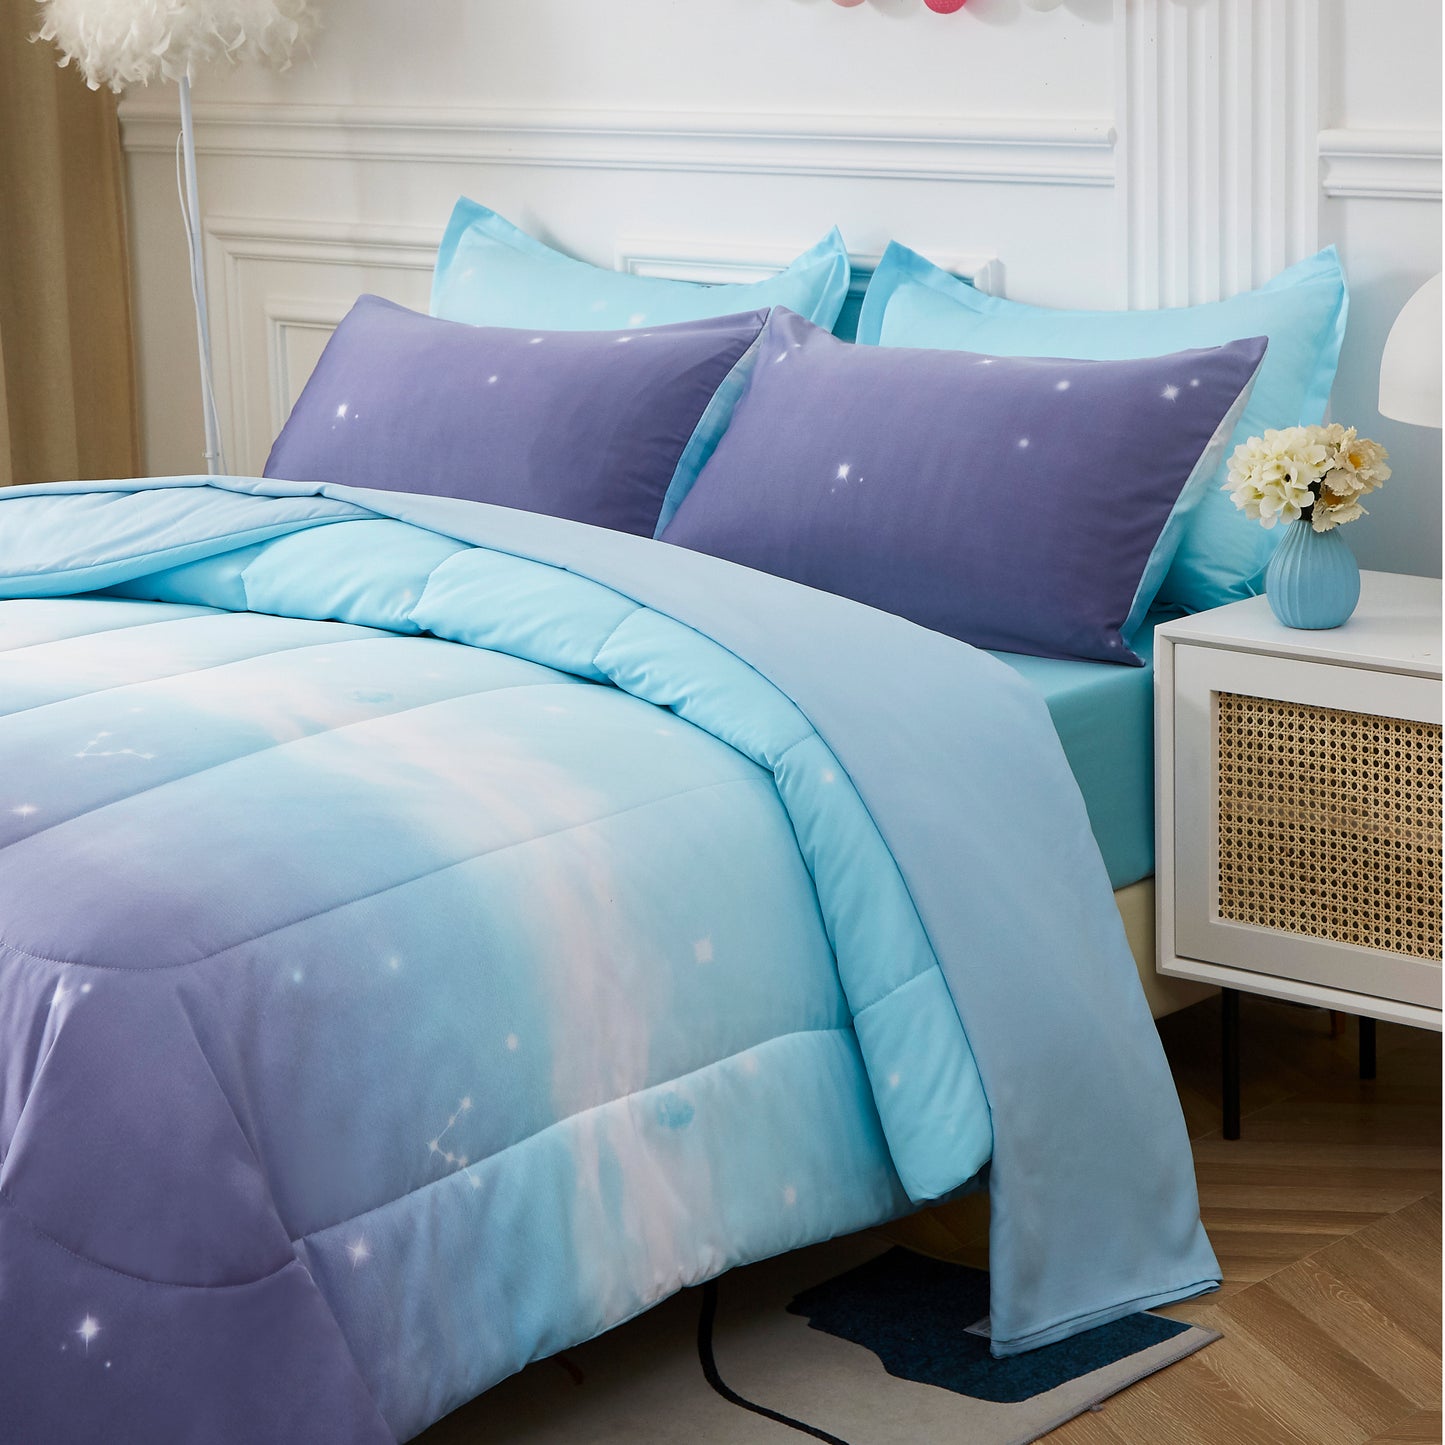 Purple Gradient Starry Sky 7 Pieces Comforter Set With 4 Pillows